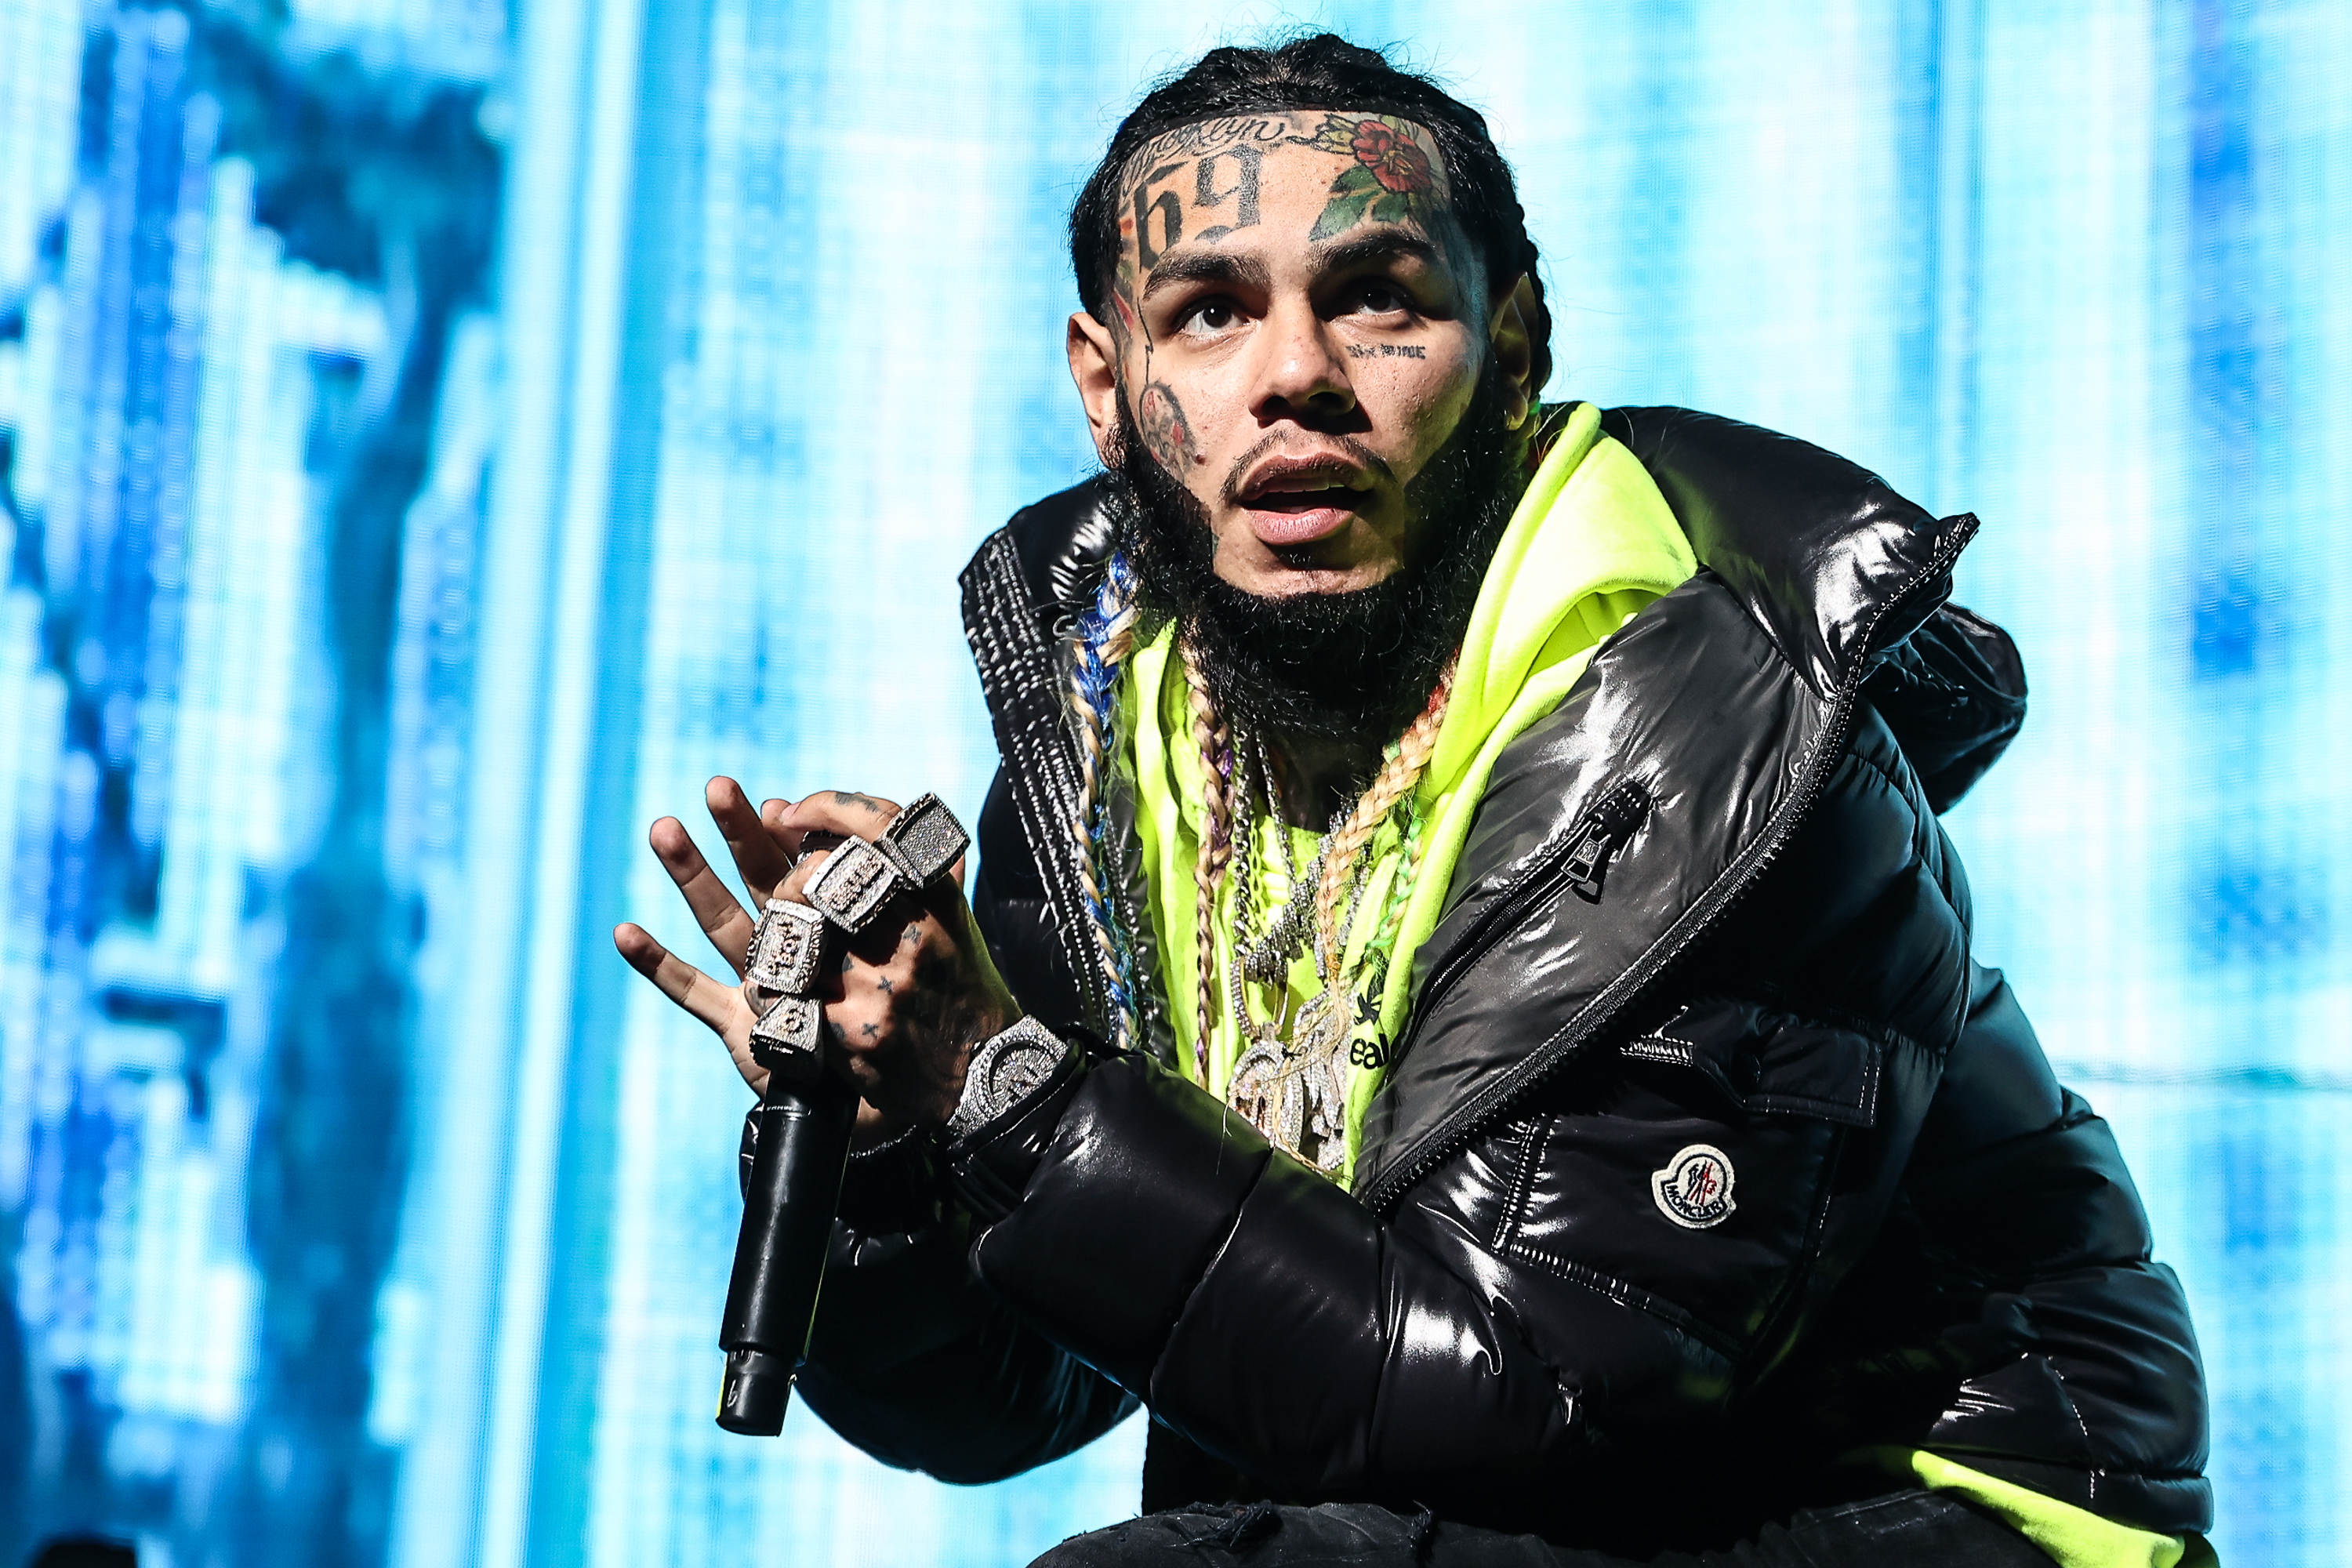 Tekashi 6ix9ine Breaks Silence On Gym Attack In Tell-All Interview: “It Was Cowardly”